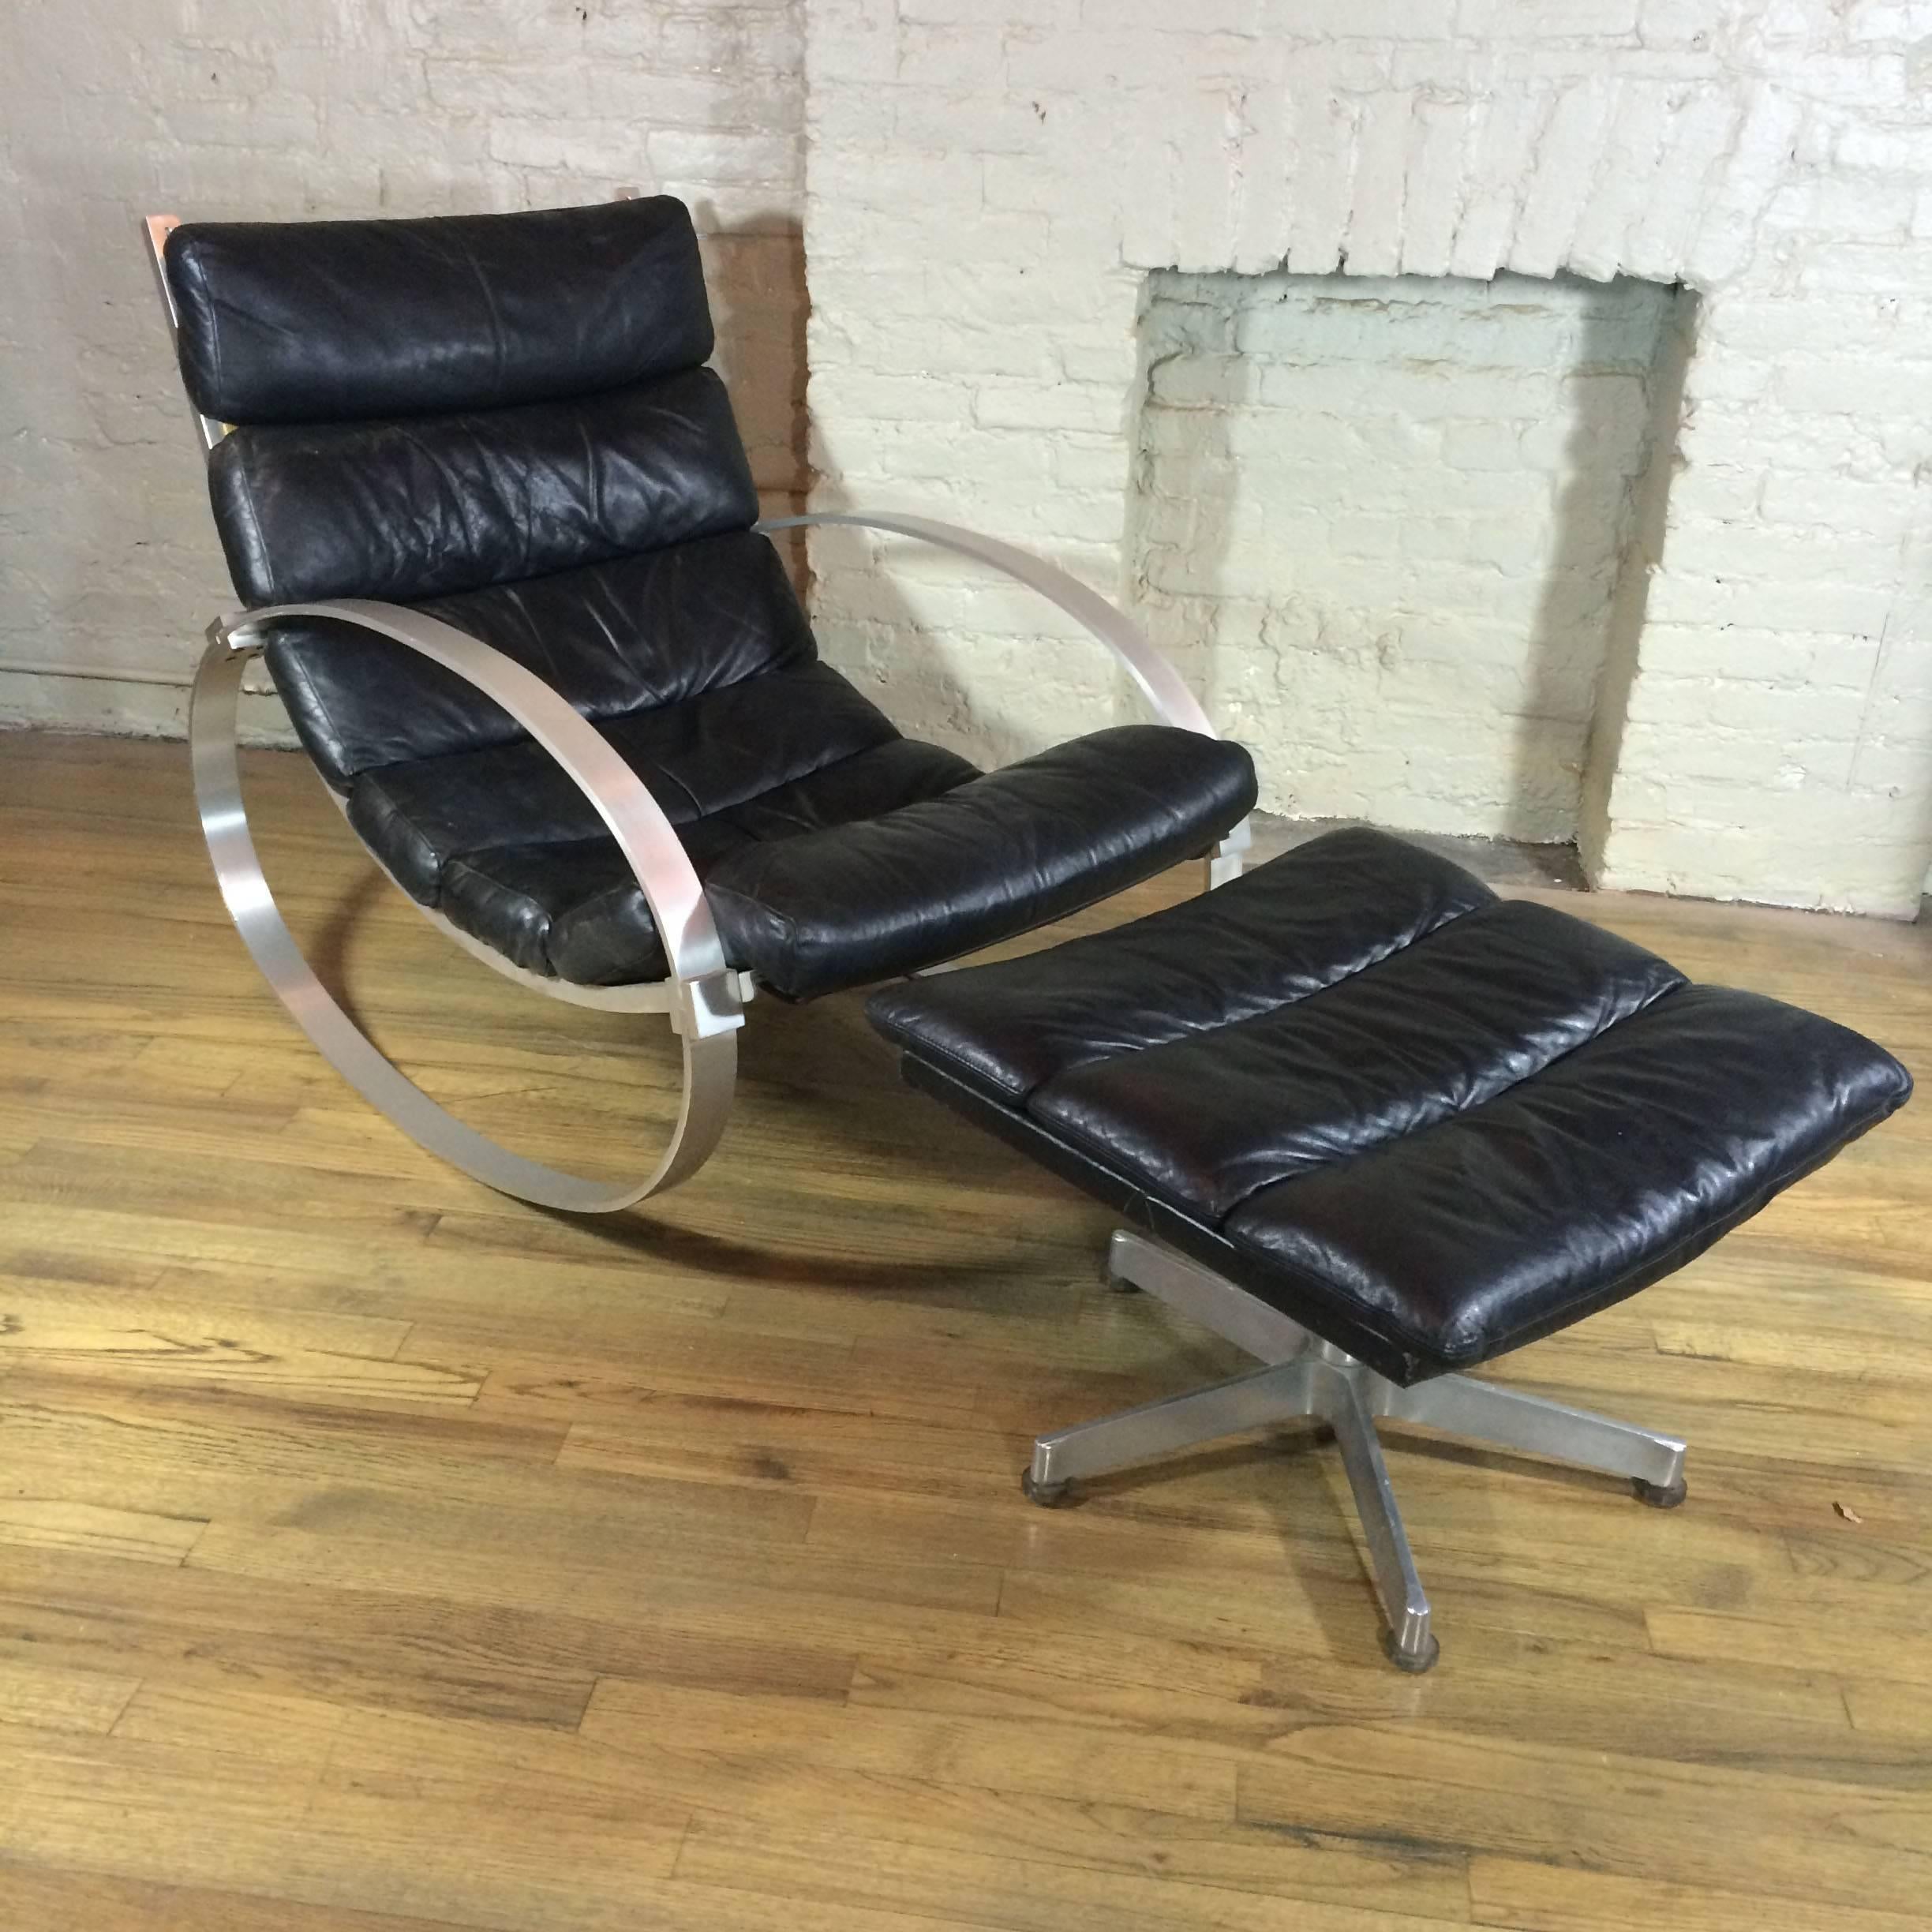 Modernist rocking lounge chair with matching ottoman designed by Hans Kaufeld, Germany features it’s original black leather rolled upholstery with brushed steel frame.

Measures: Chair is: 40